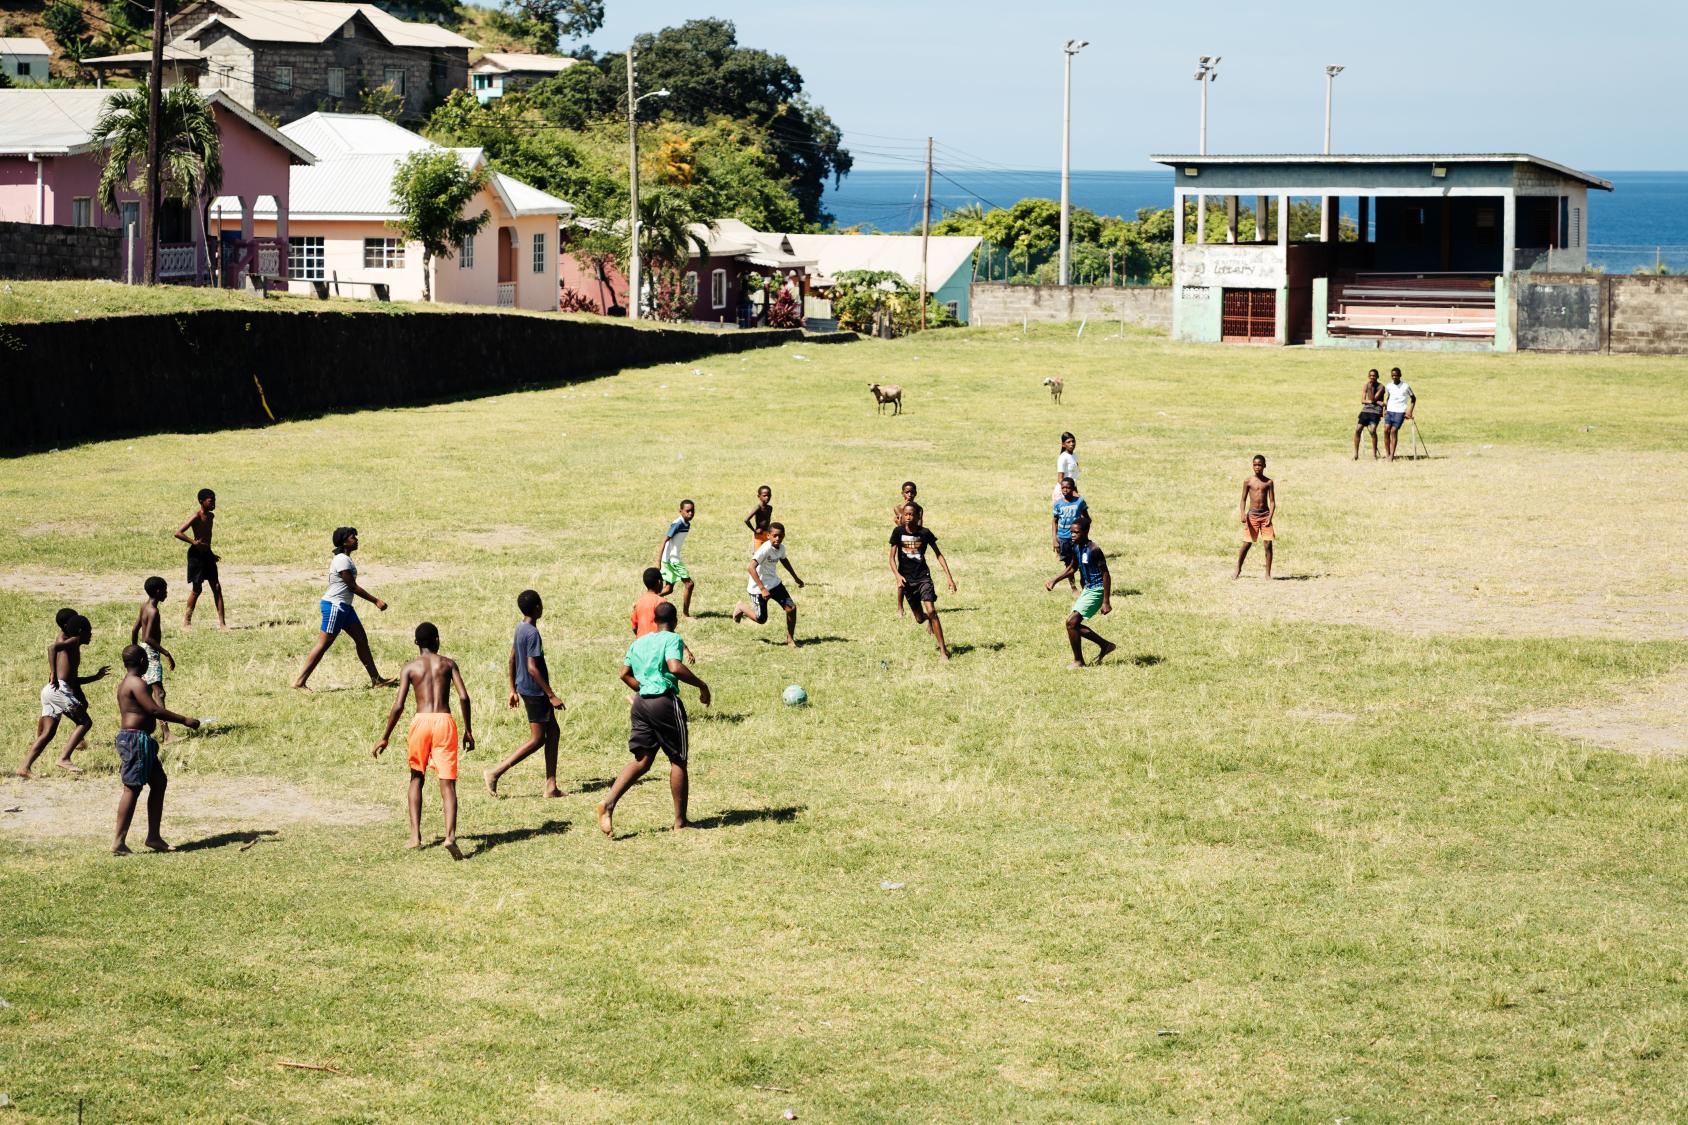 Children playing soccer in a grassy area. 